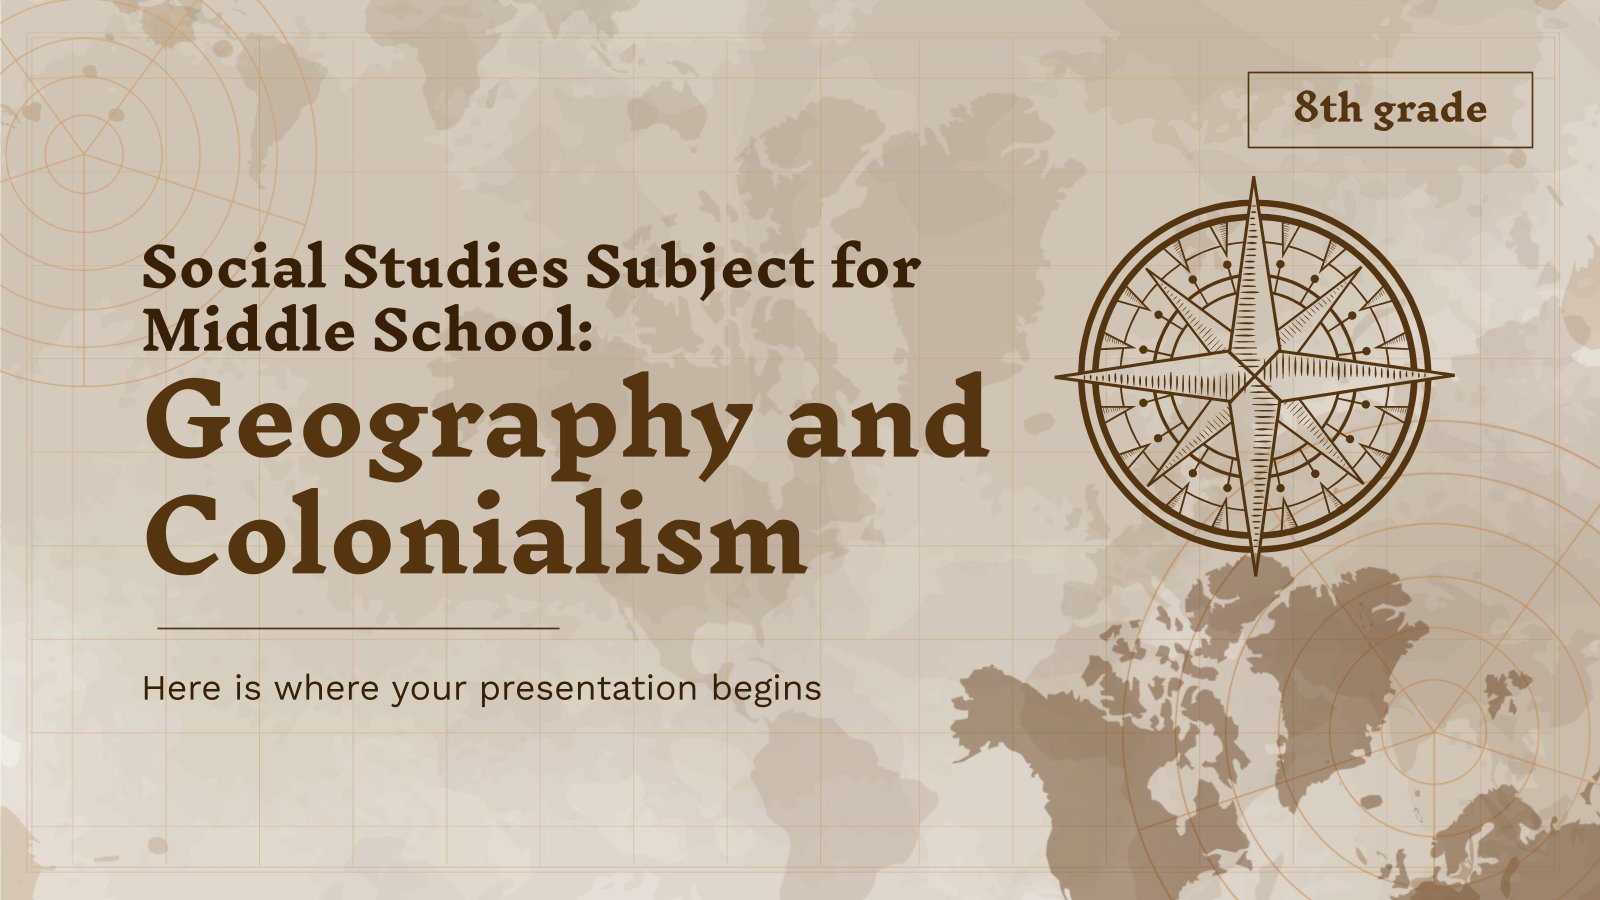 Social Studies Subject for Middle School - 8th Grade: Geography and Colonialism presentation template 